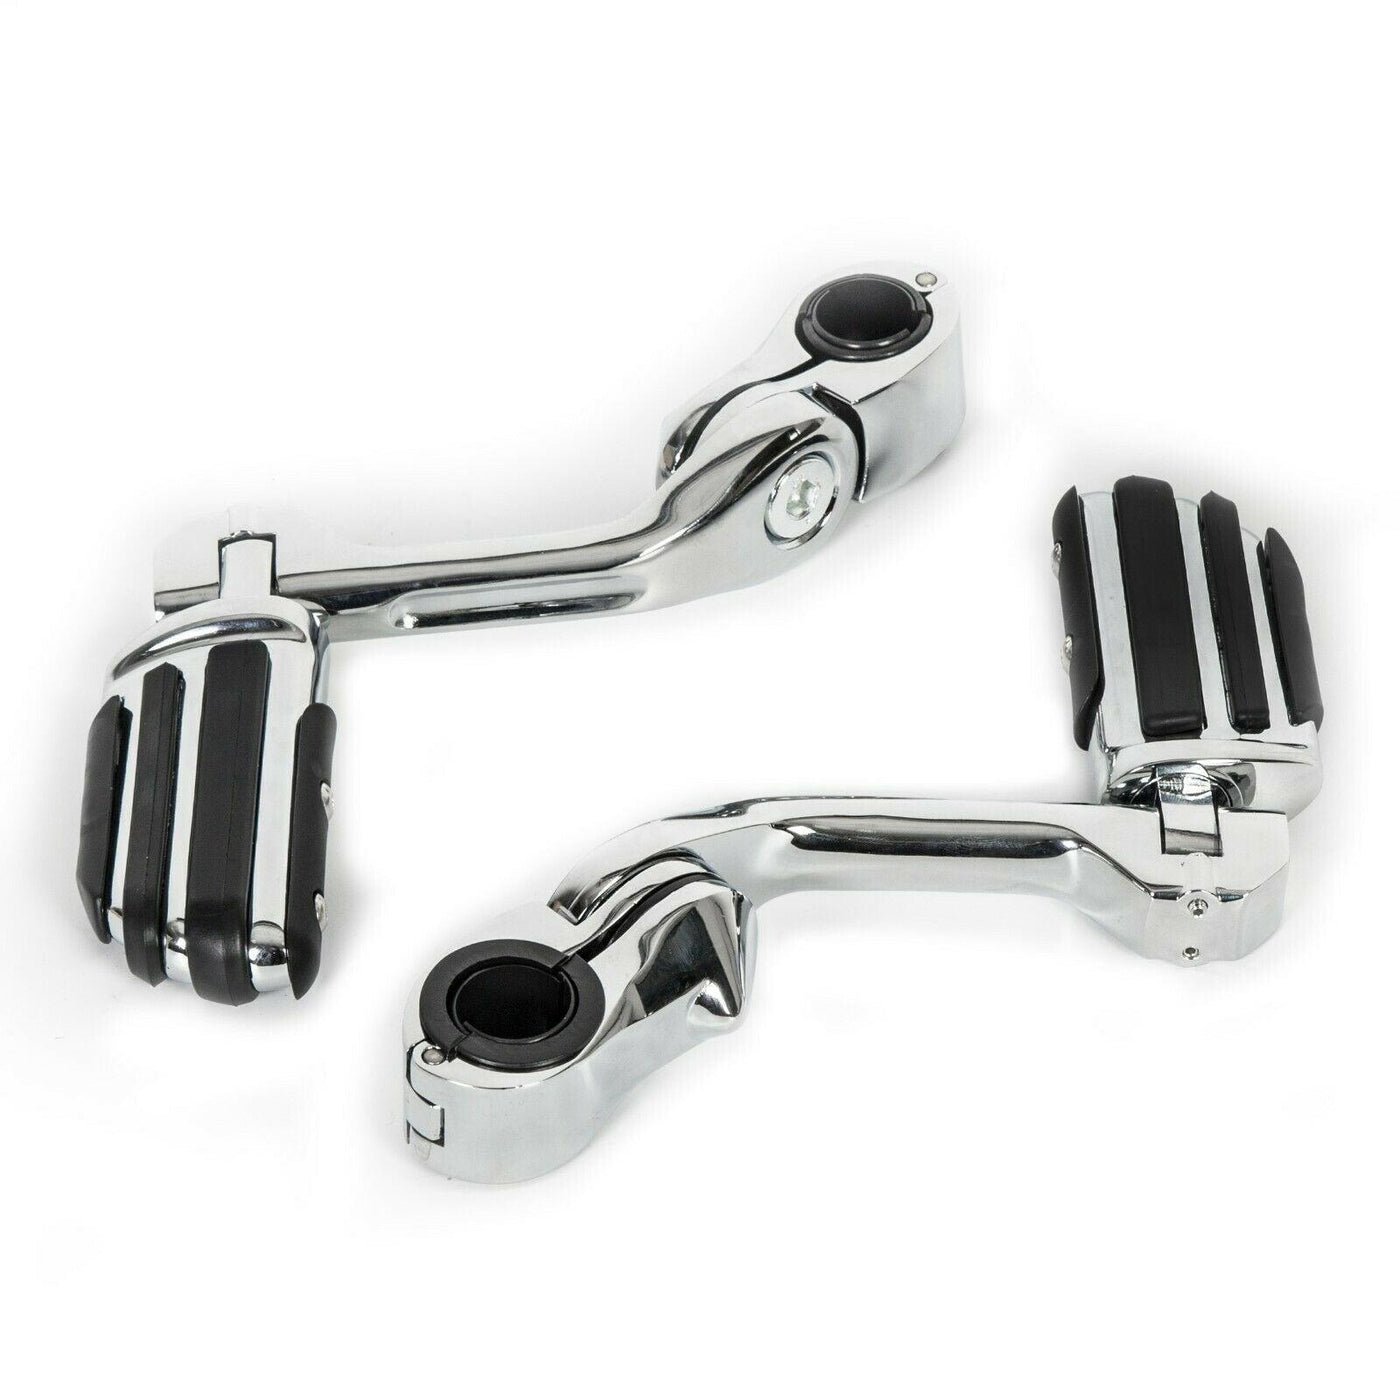 Long Highway Foot Pegs For Harley Davidson Road King / Glide 1-1/4" Bars - Moto Life Products